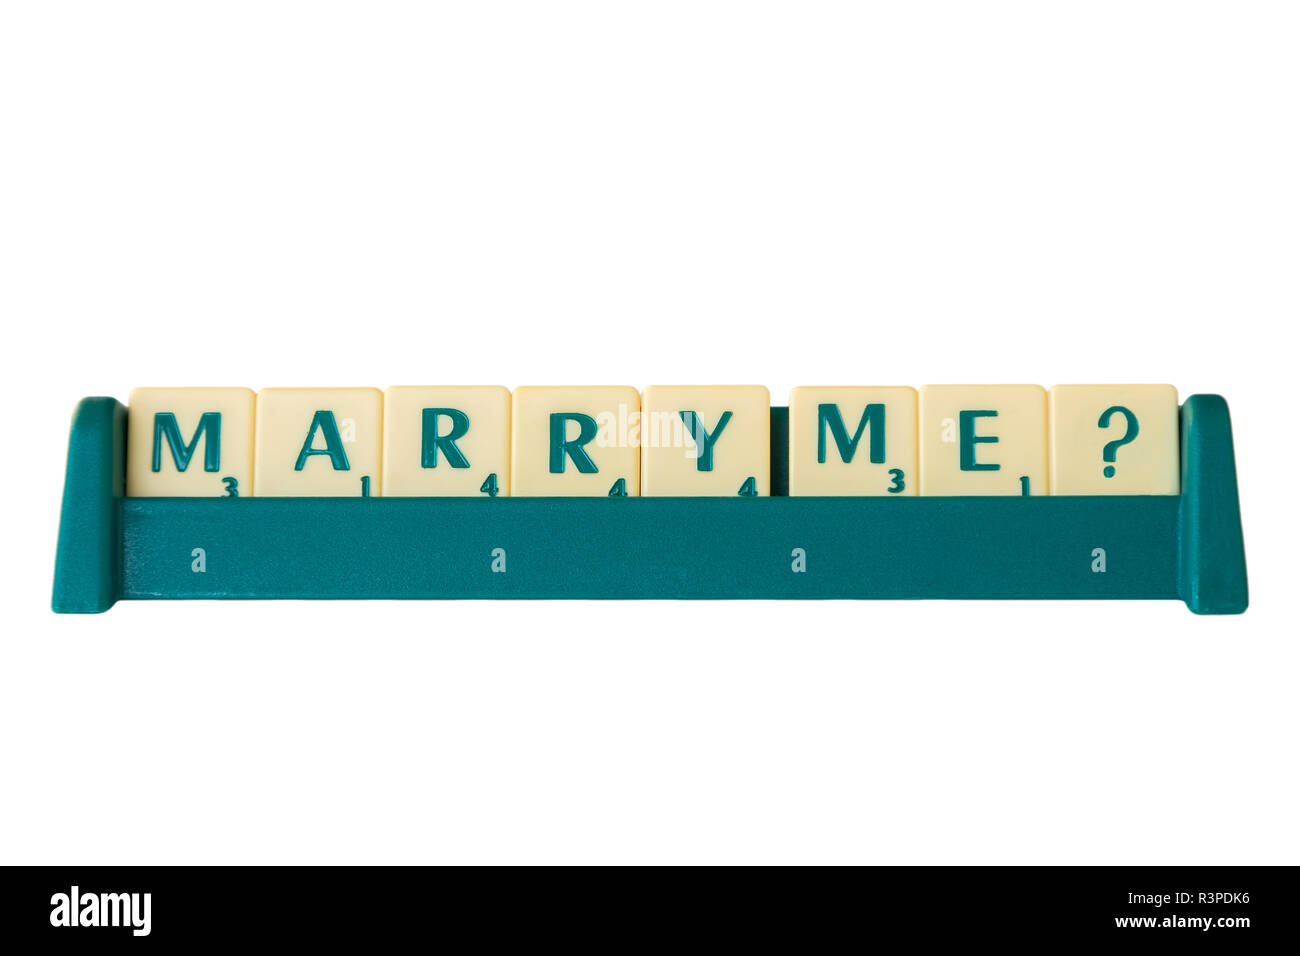 Scrabble game letter tiles with score value on a stand forming the phrase 'Marry Me?'. Isolated on white background. Stock Photo